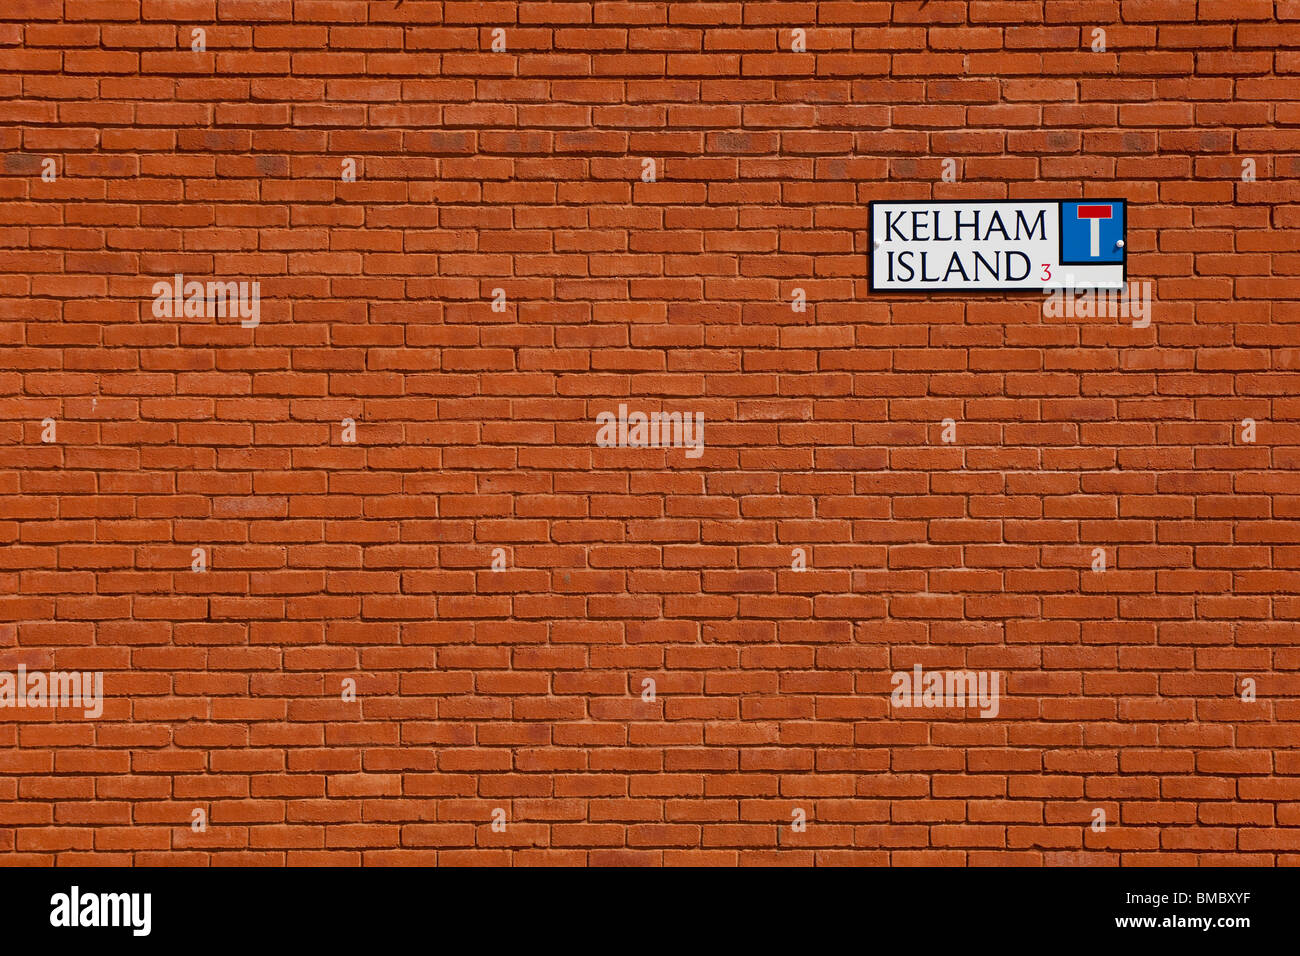 Street sign on a red brick wall in Kelham Island, Sheffield. Stock Photo